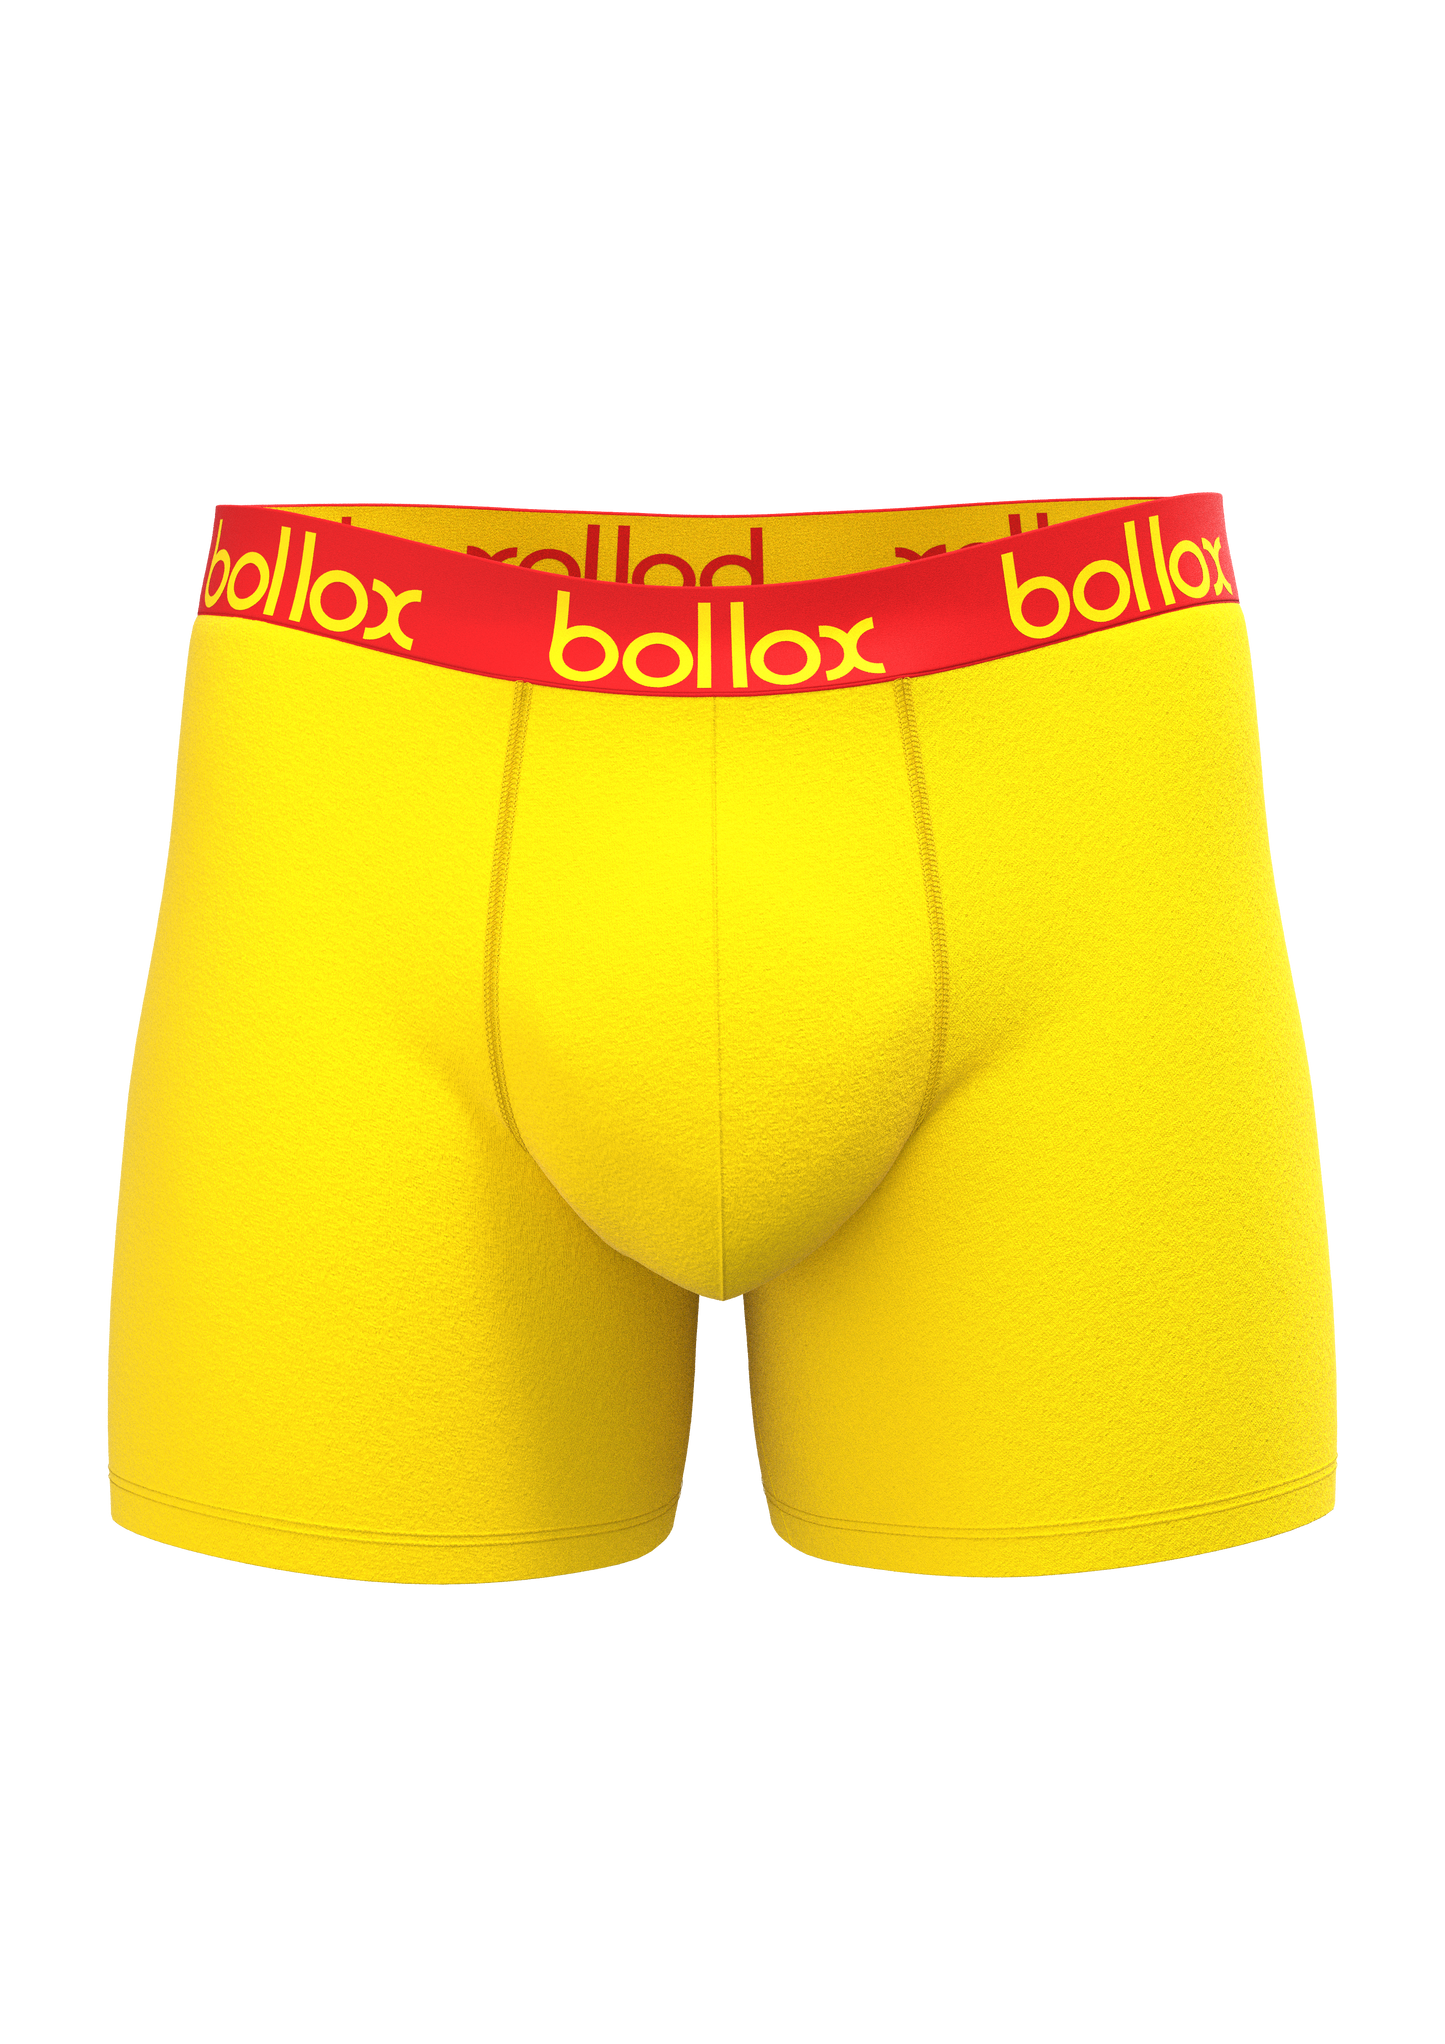 Red & Yellow Duo Tone Set - Men's cotton boxer shorts (2 pack)